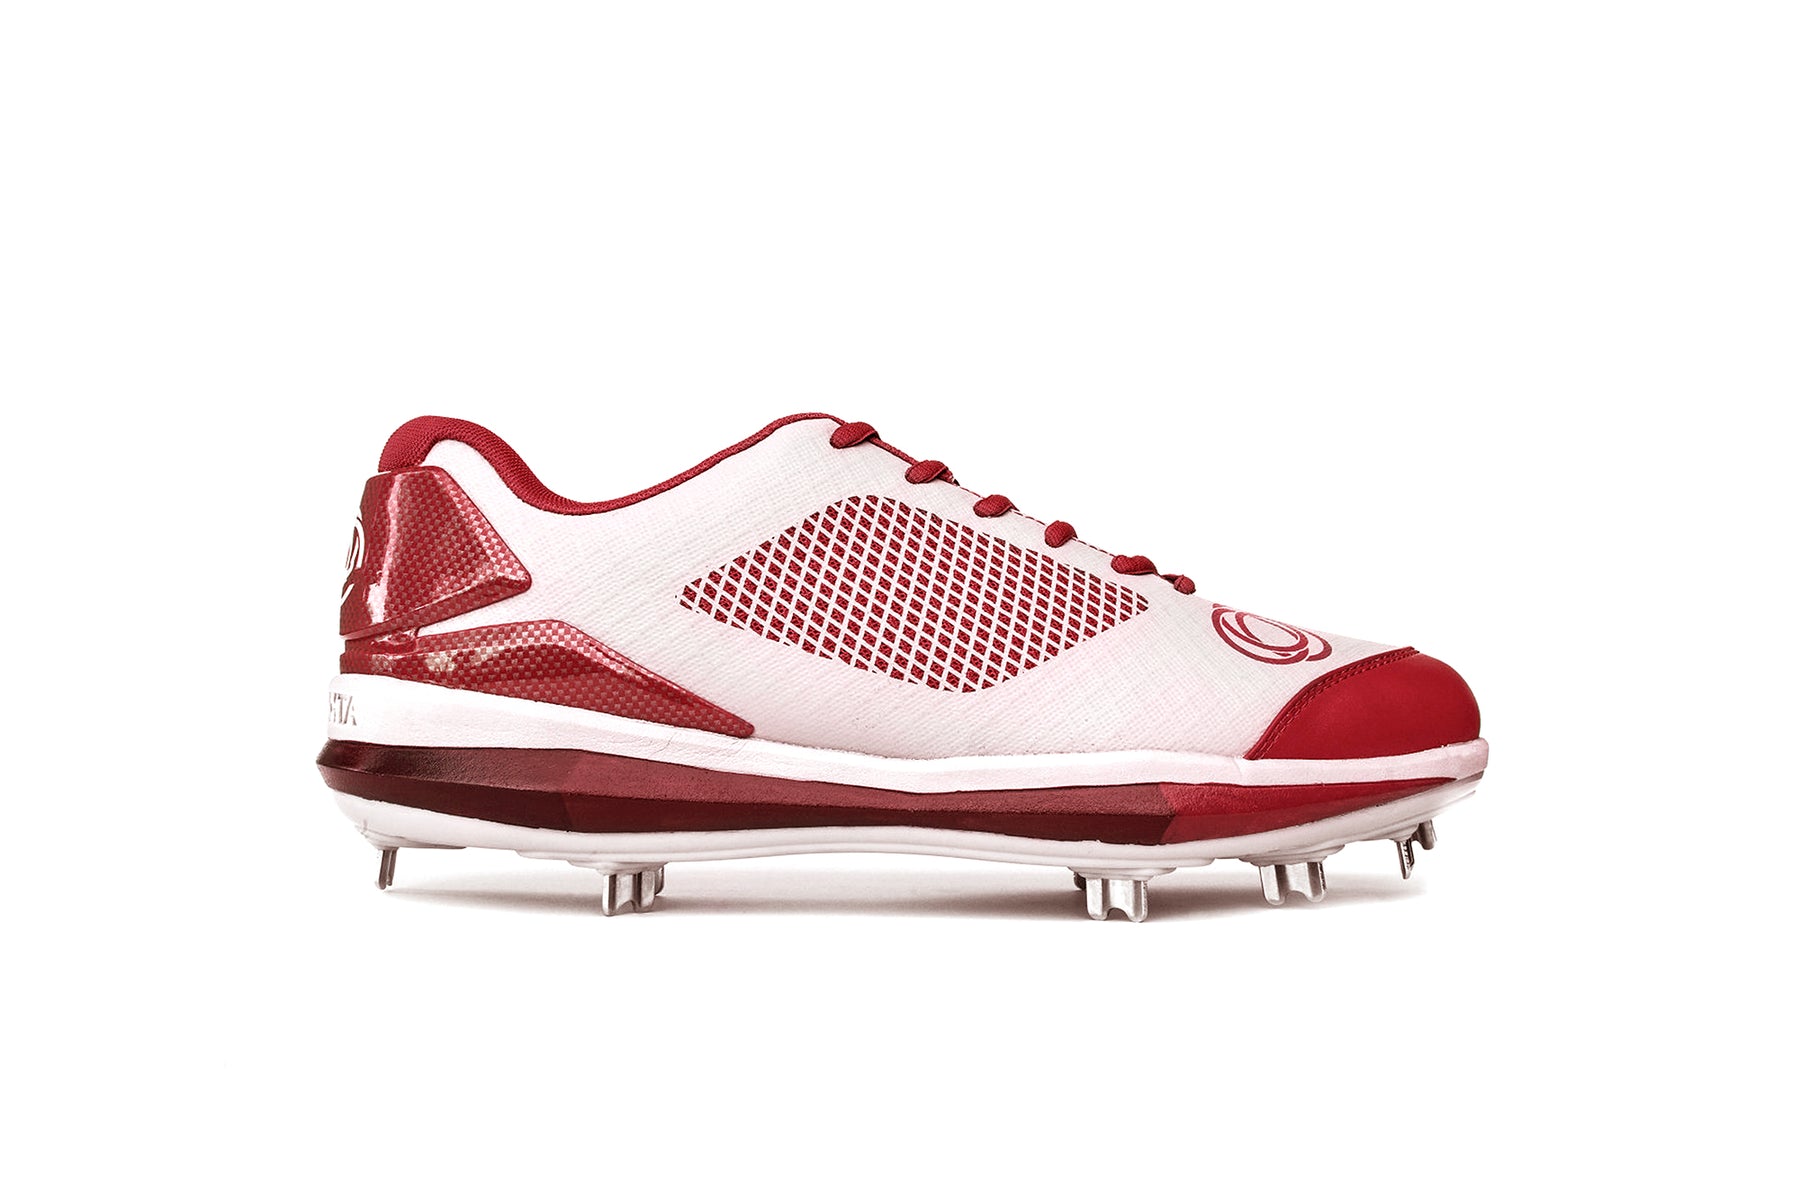 red softball cleats